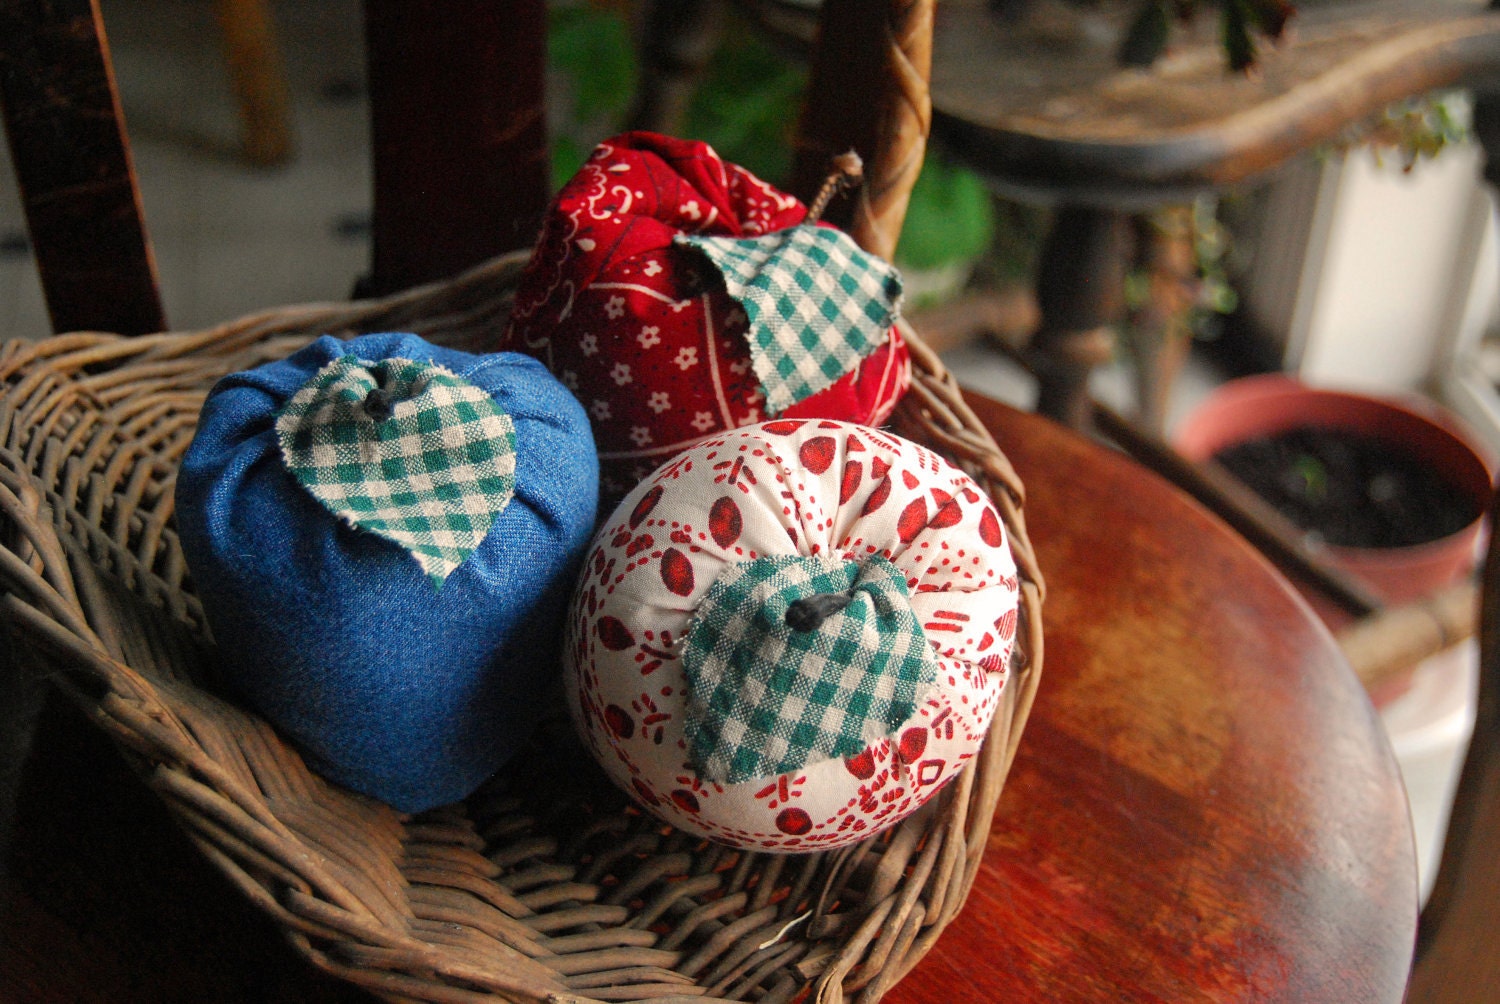 Handmade Cloth Scented Apples "Jeans Go With Everything Collection" Set of Three